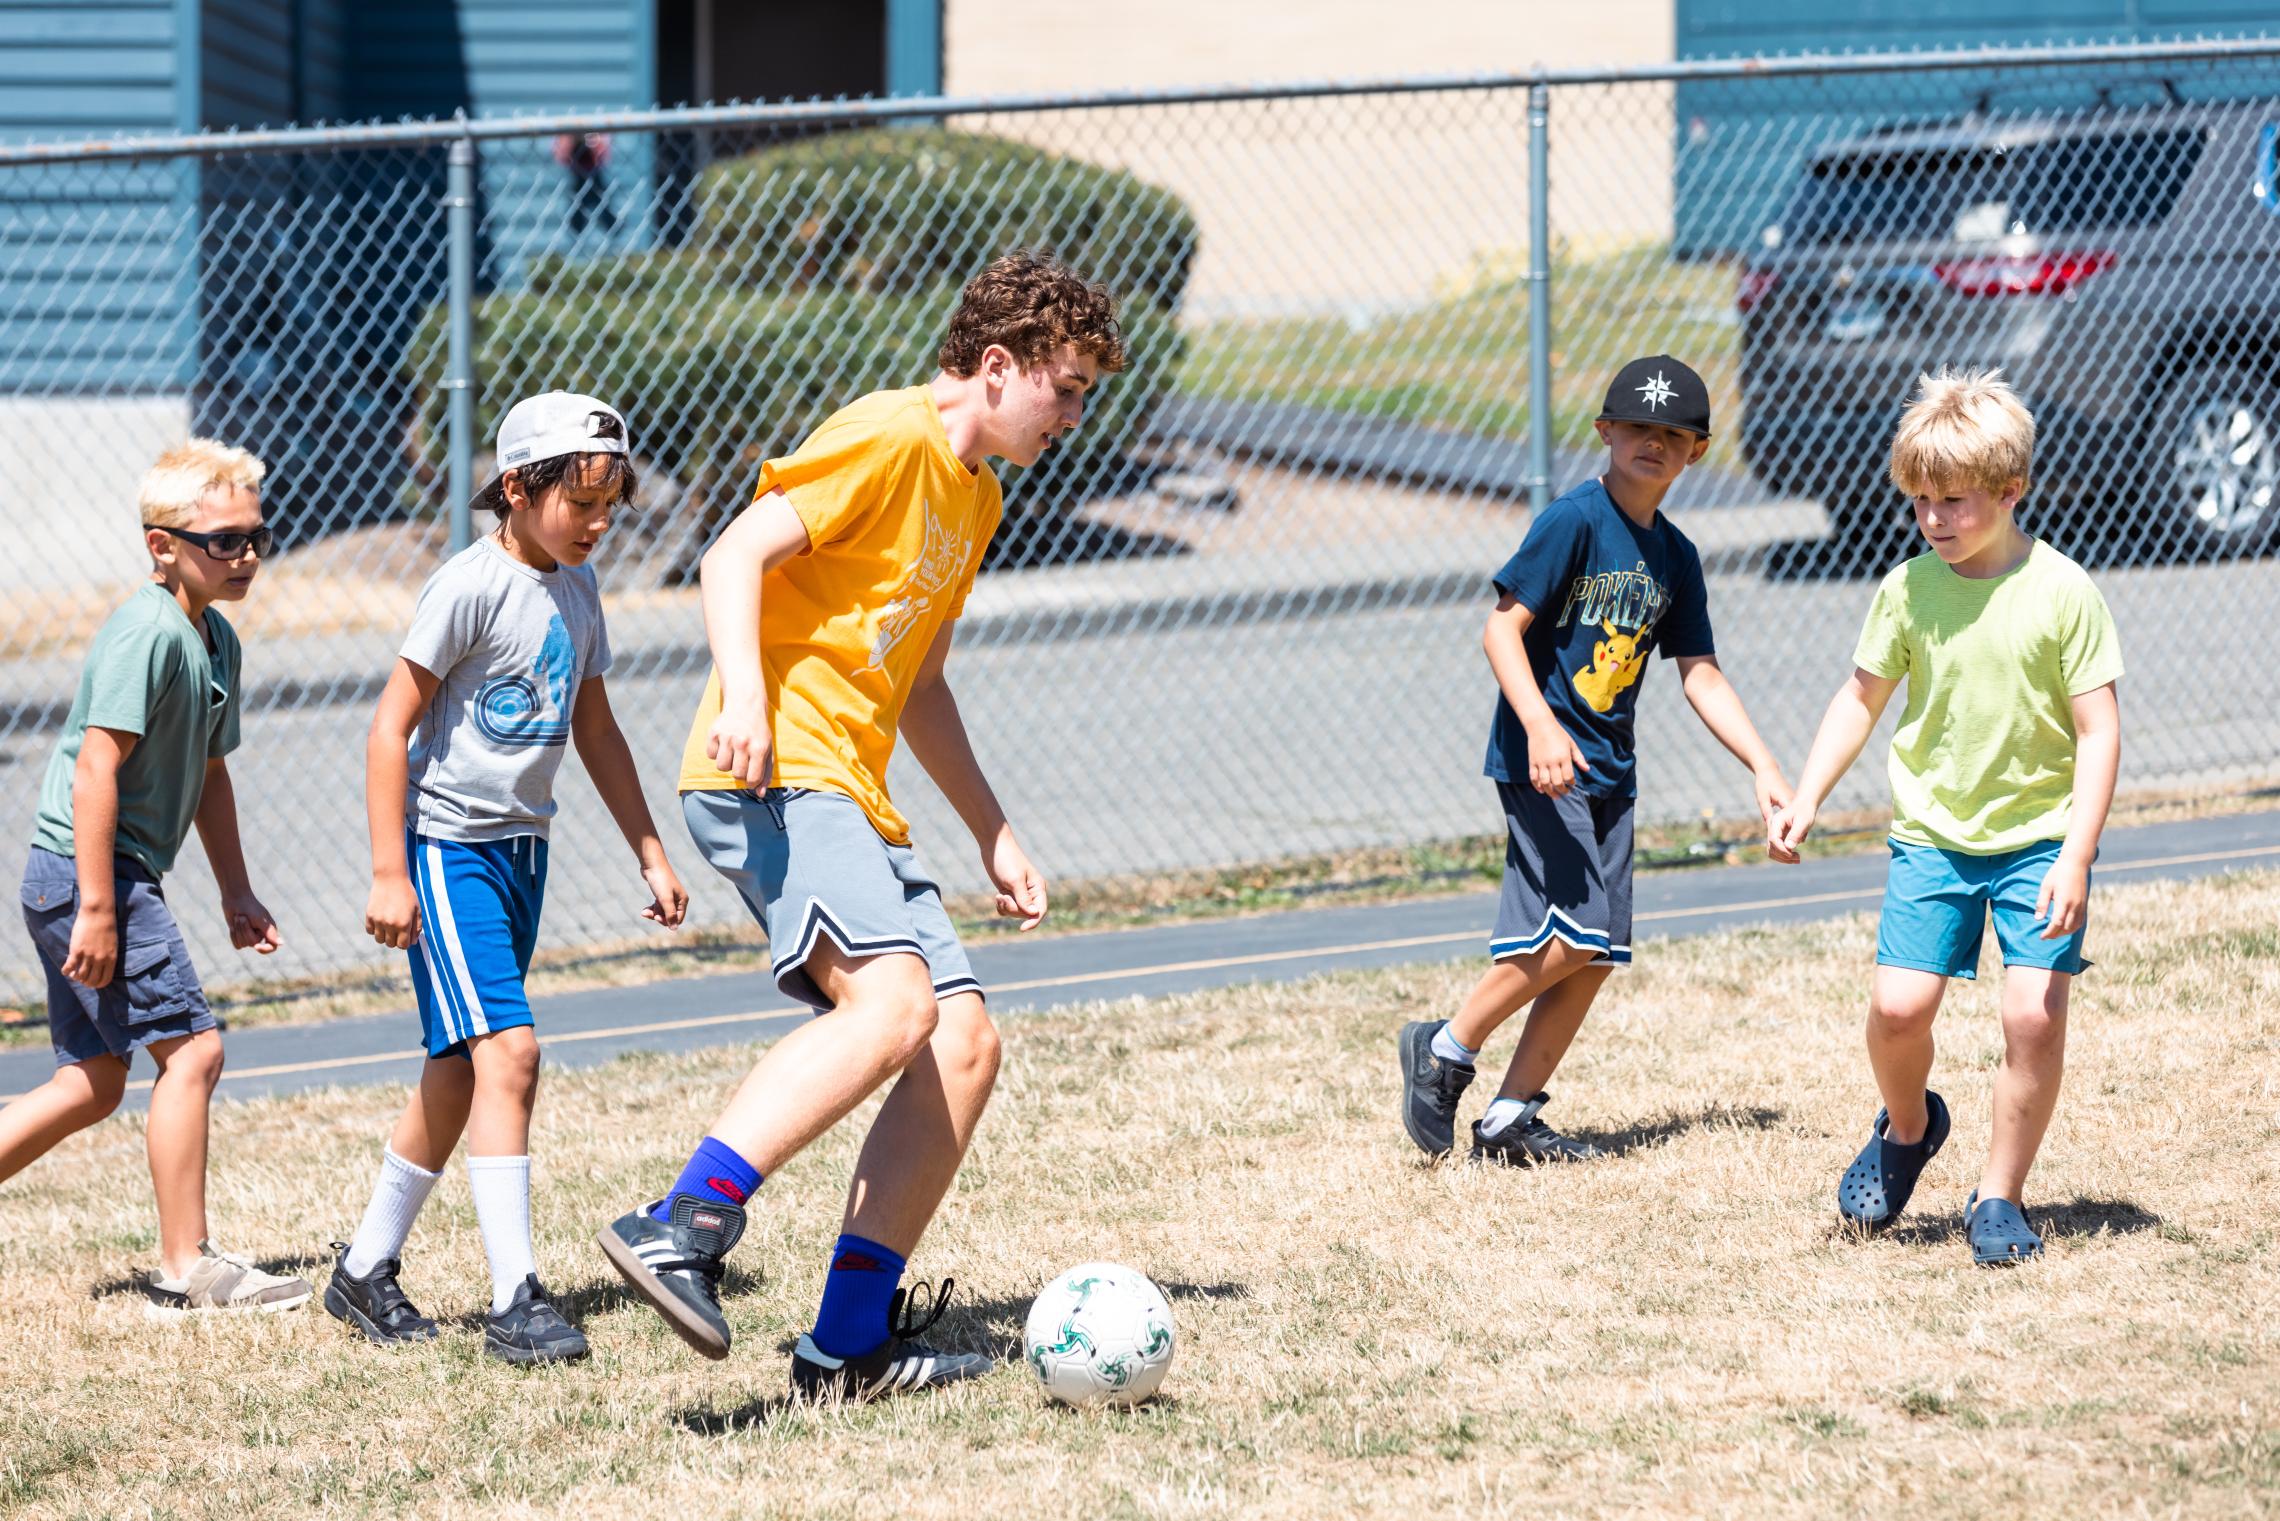 CIT plays soccer with campers at the YMCA